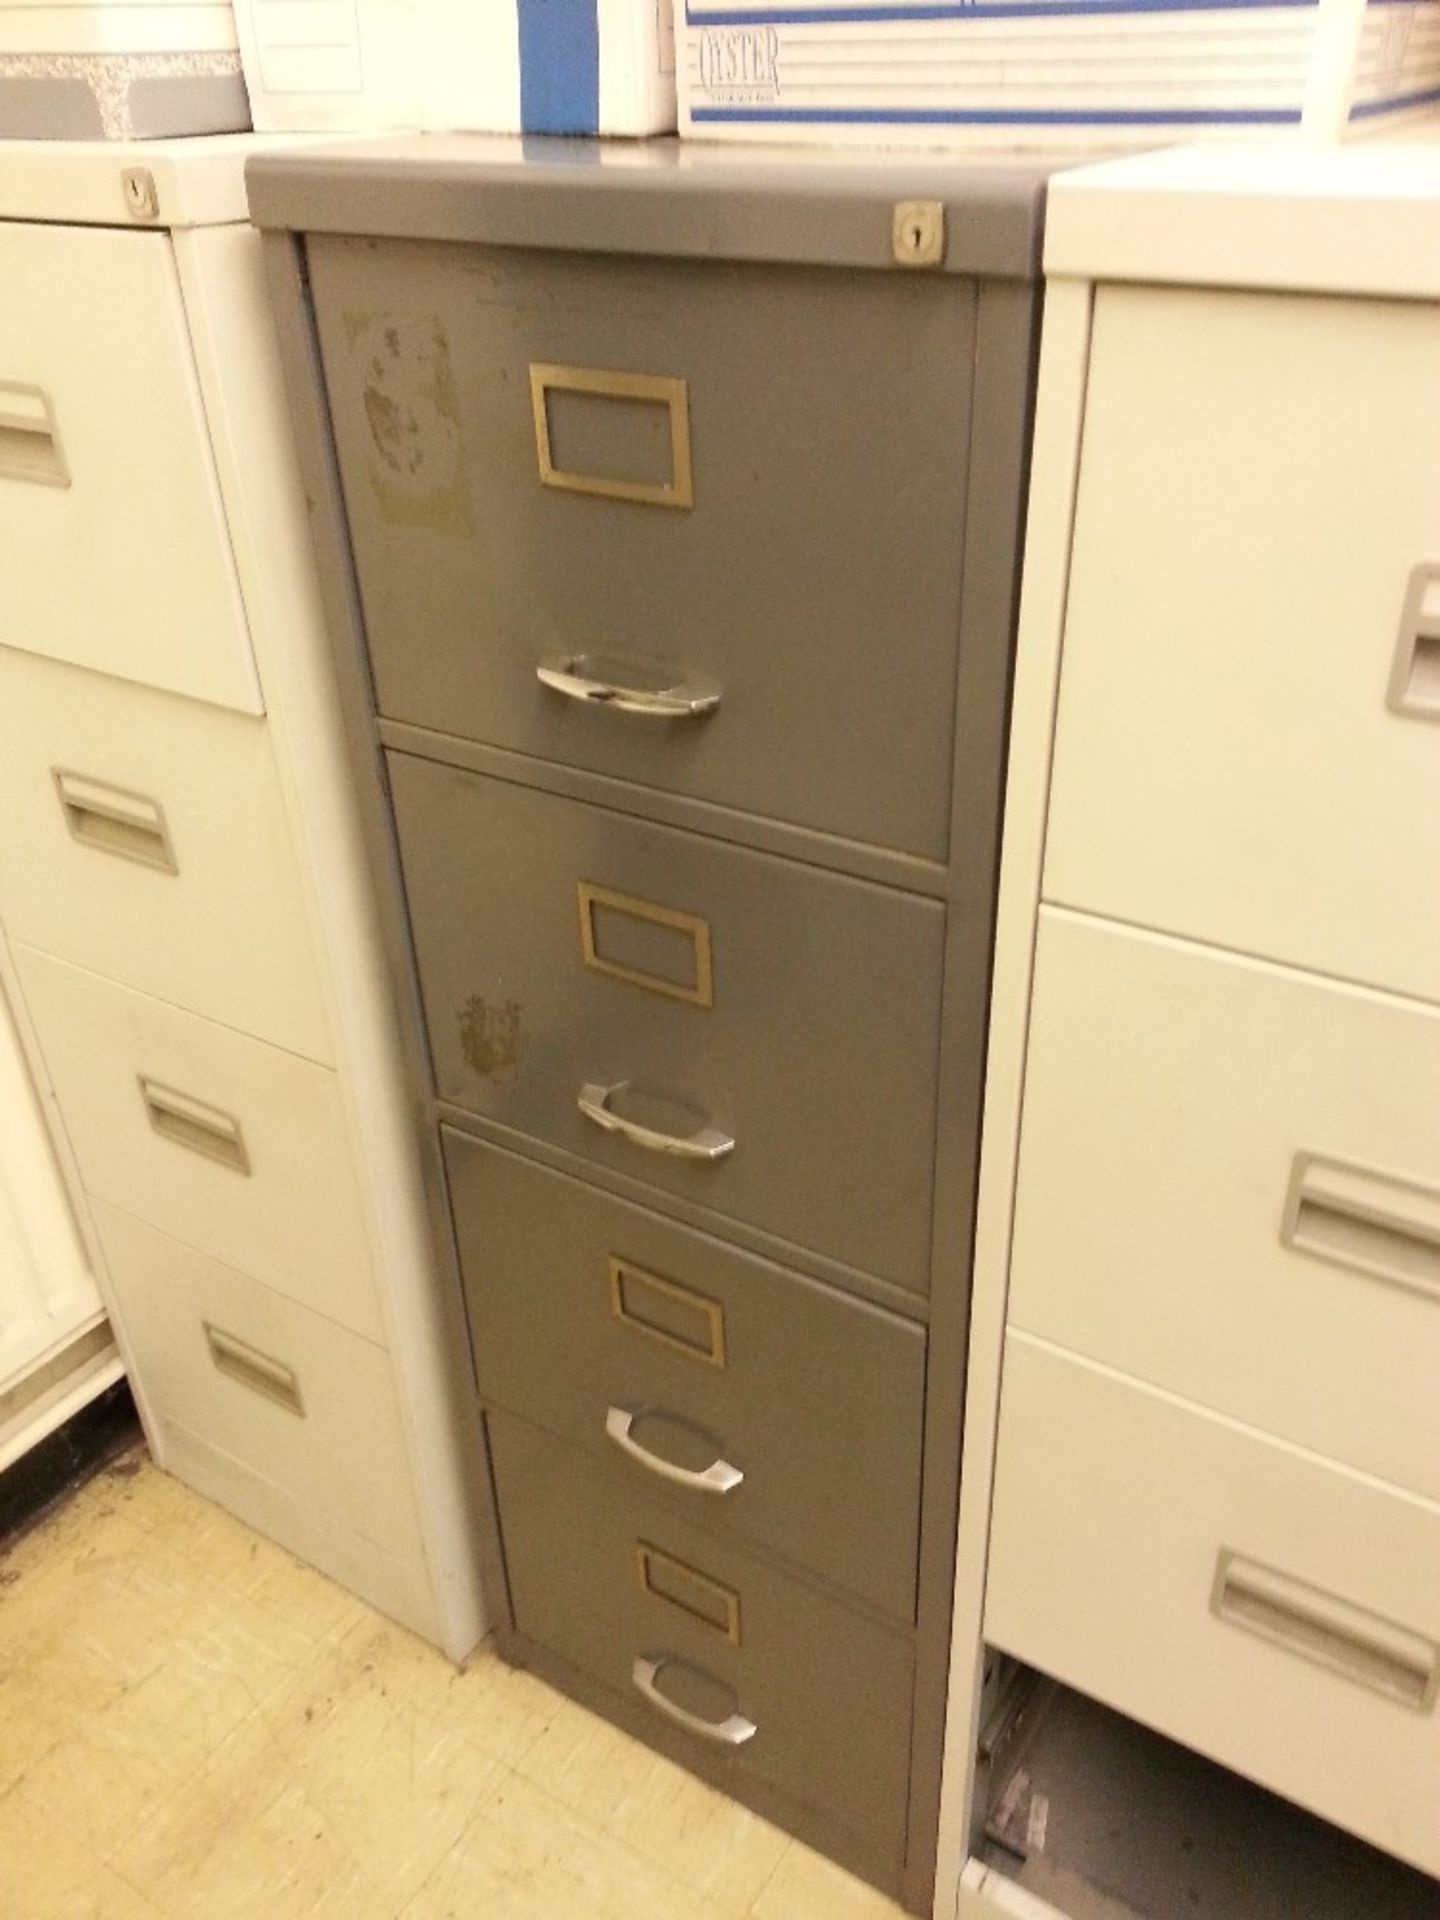 4 drawer metal filing cabinet Located in Gateshead Tyne and Wear collection Friday 24th till